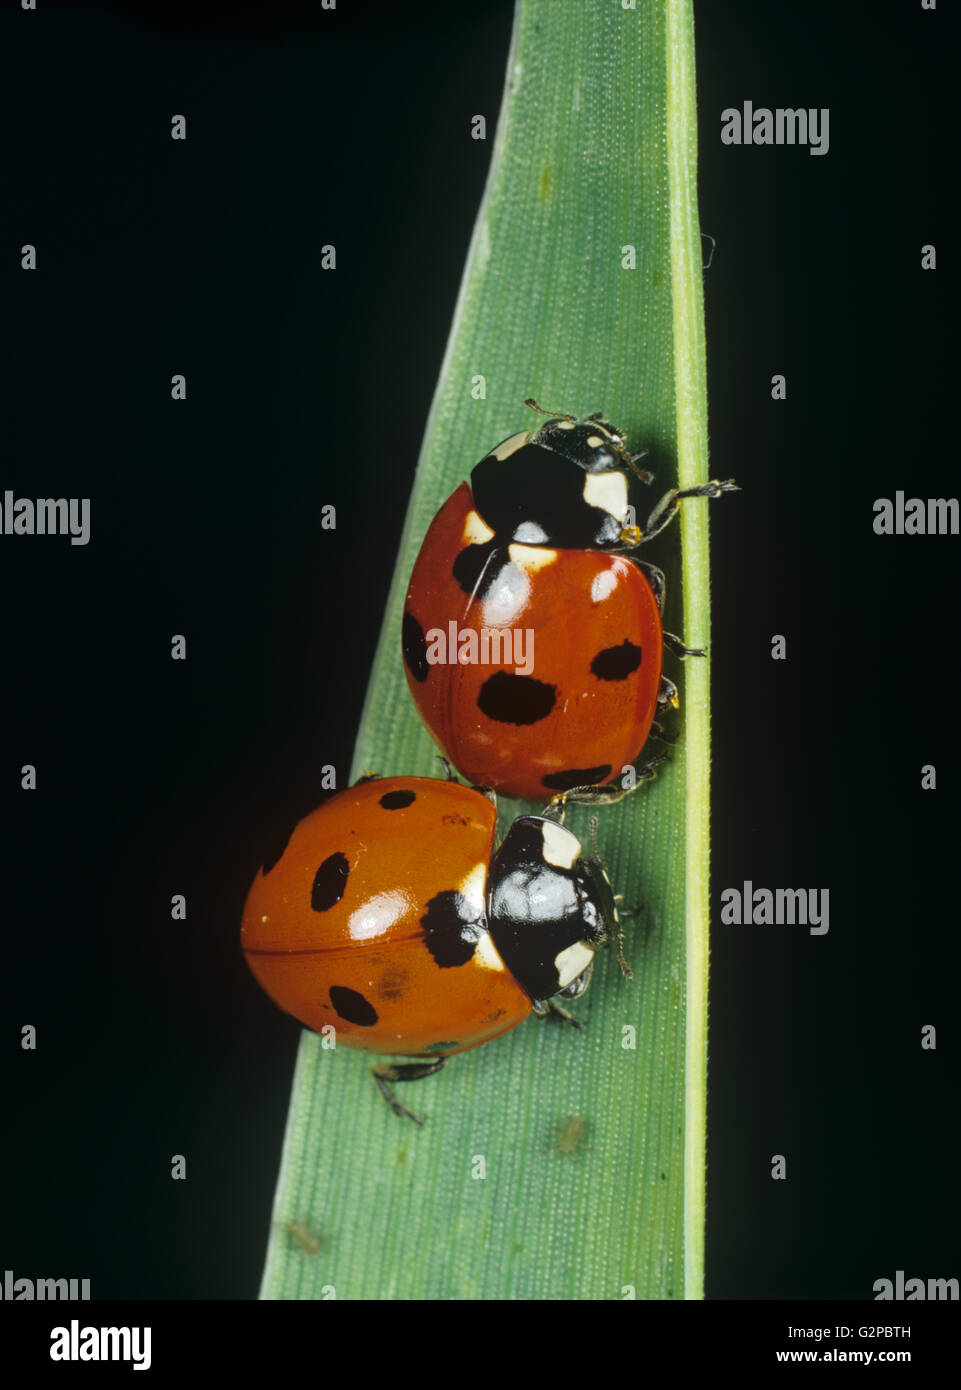 A seven spotted ladybirds, Coccinella septempunctata, on a wheat leaf Stock Photo